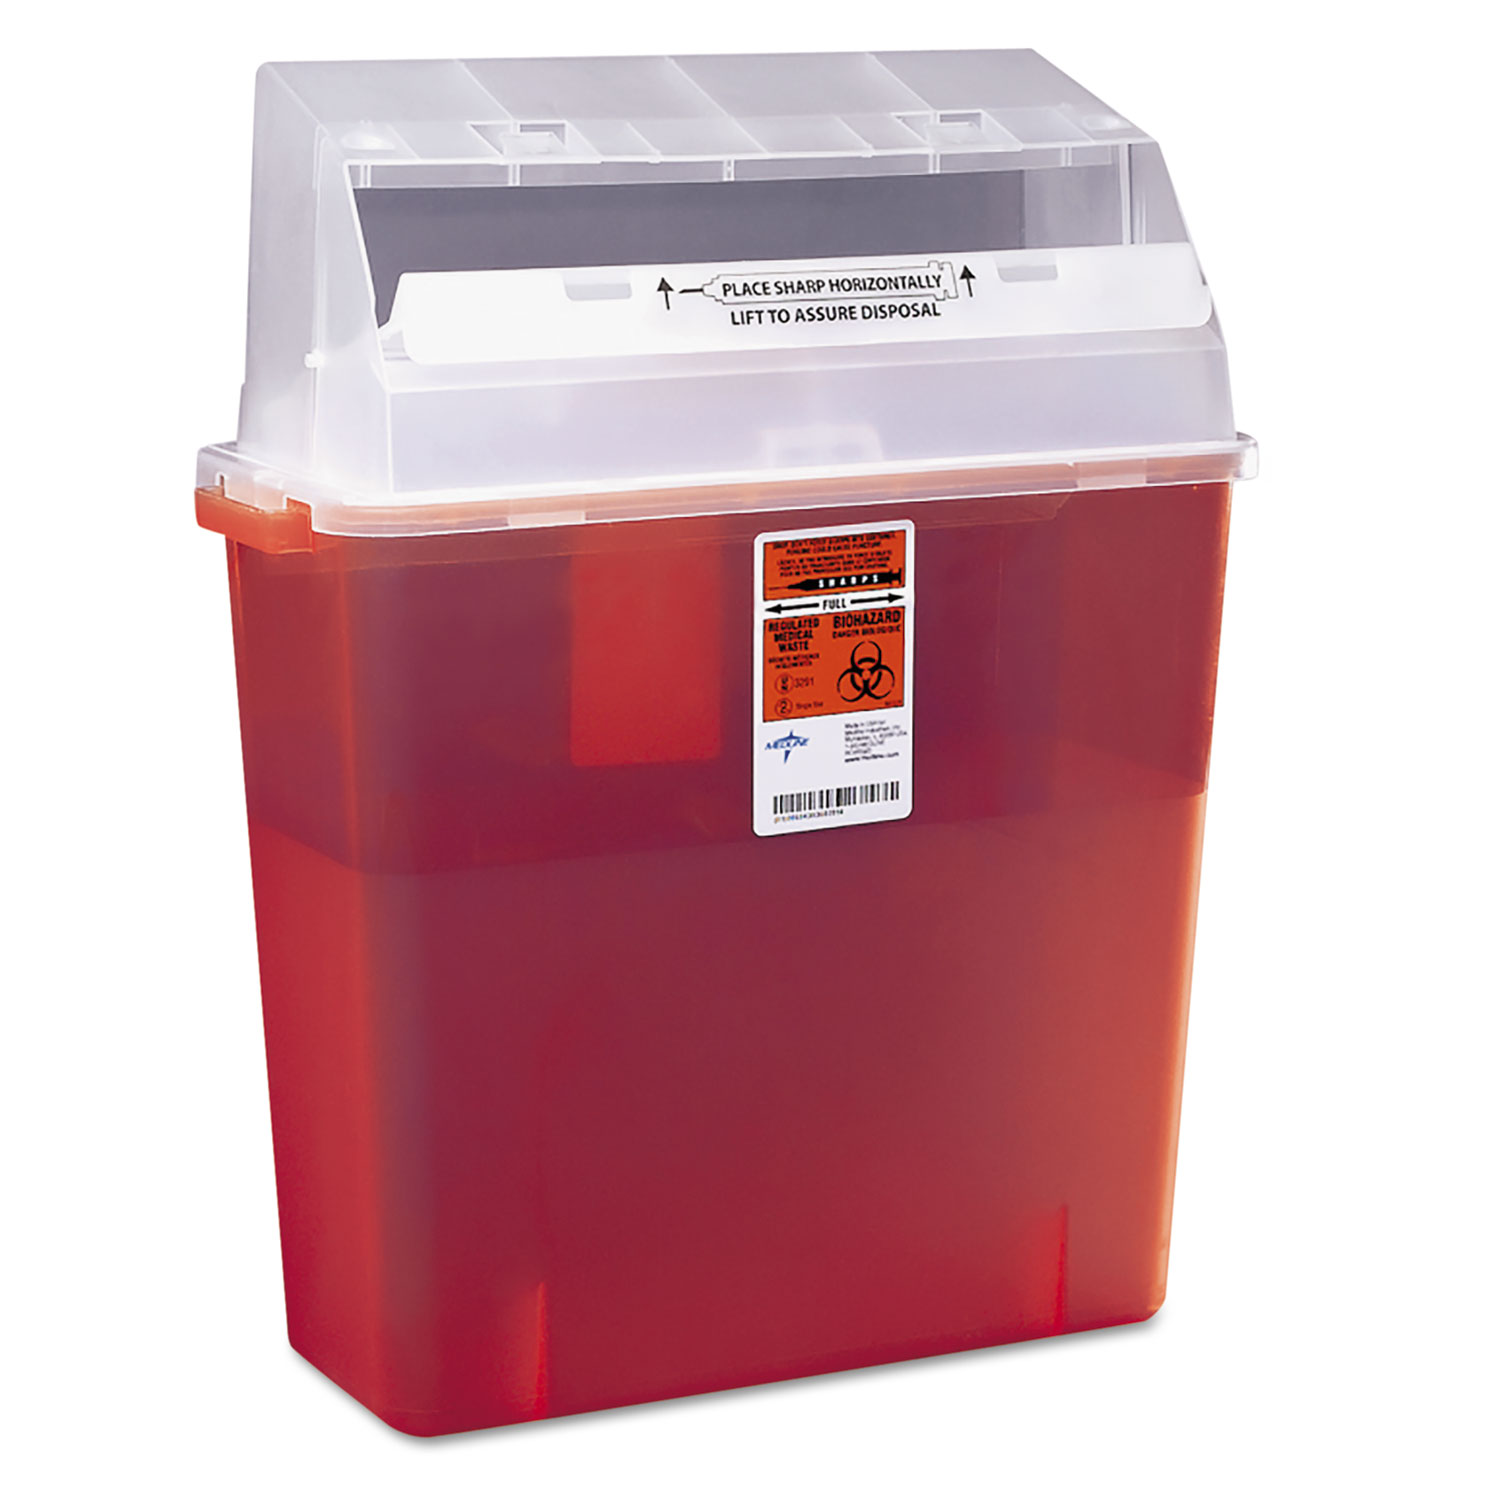  Medline MDS705203H Sharps Container for Patient Room, Plastic, 3 gal, Rectangular, Red (MIIMDS705203H) 